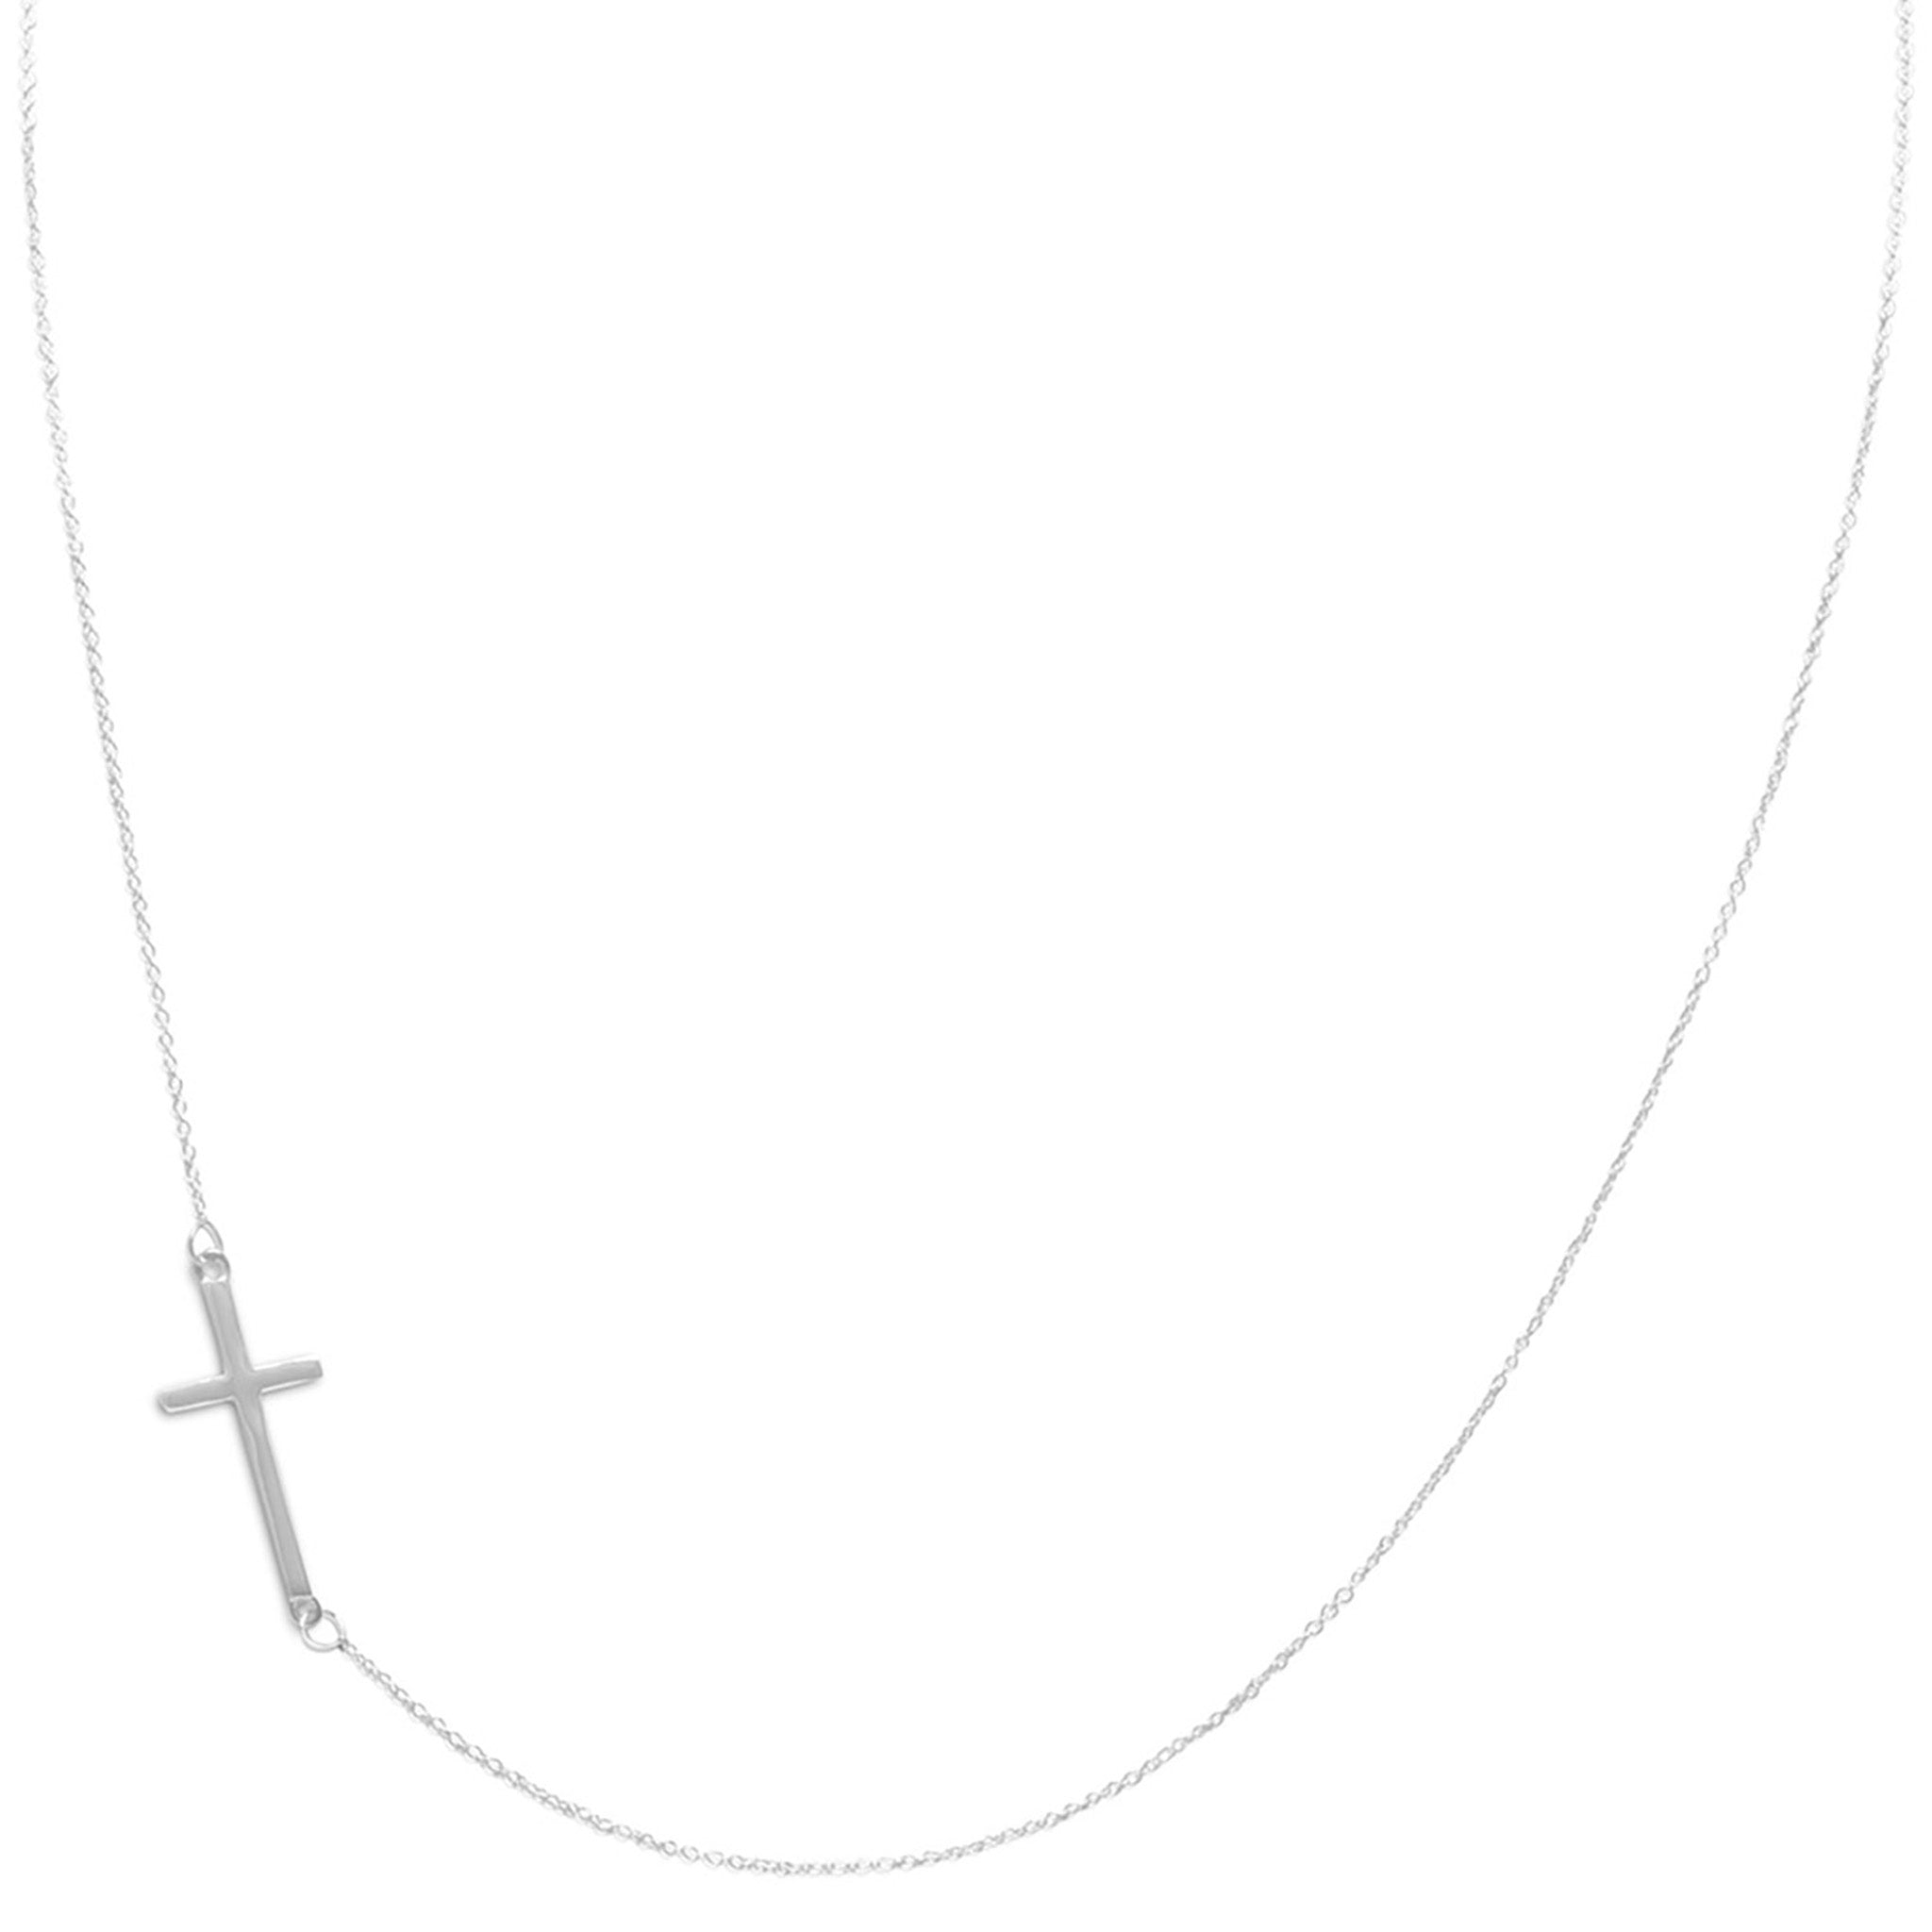 Off Center Cross Necklace